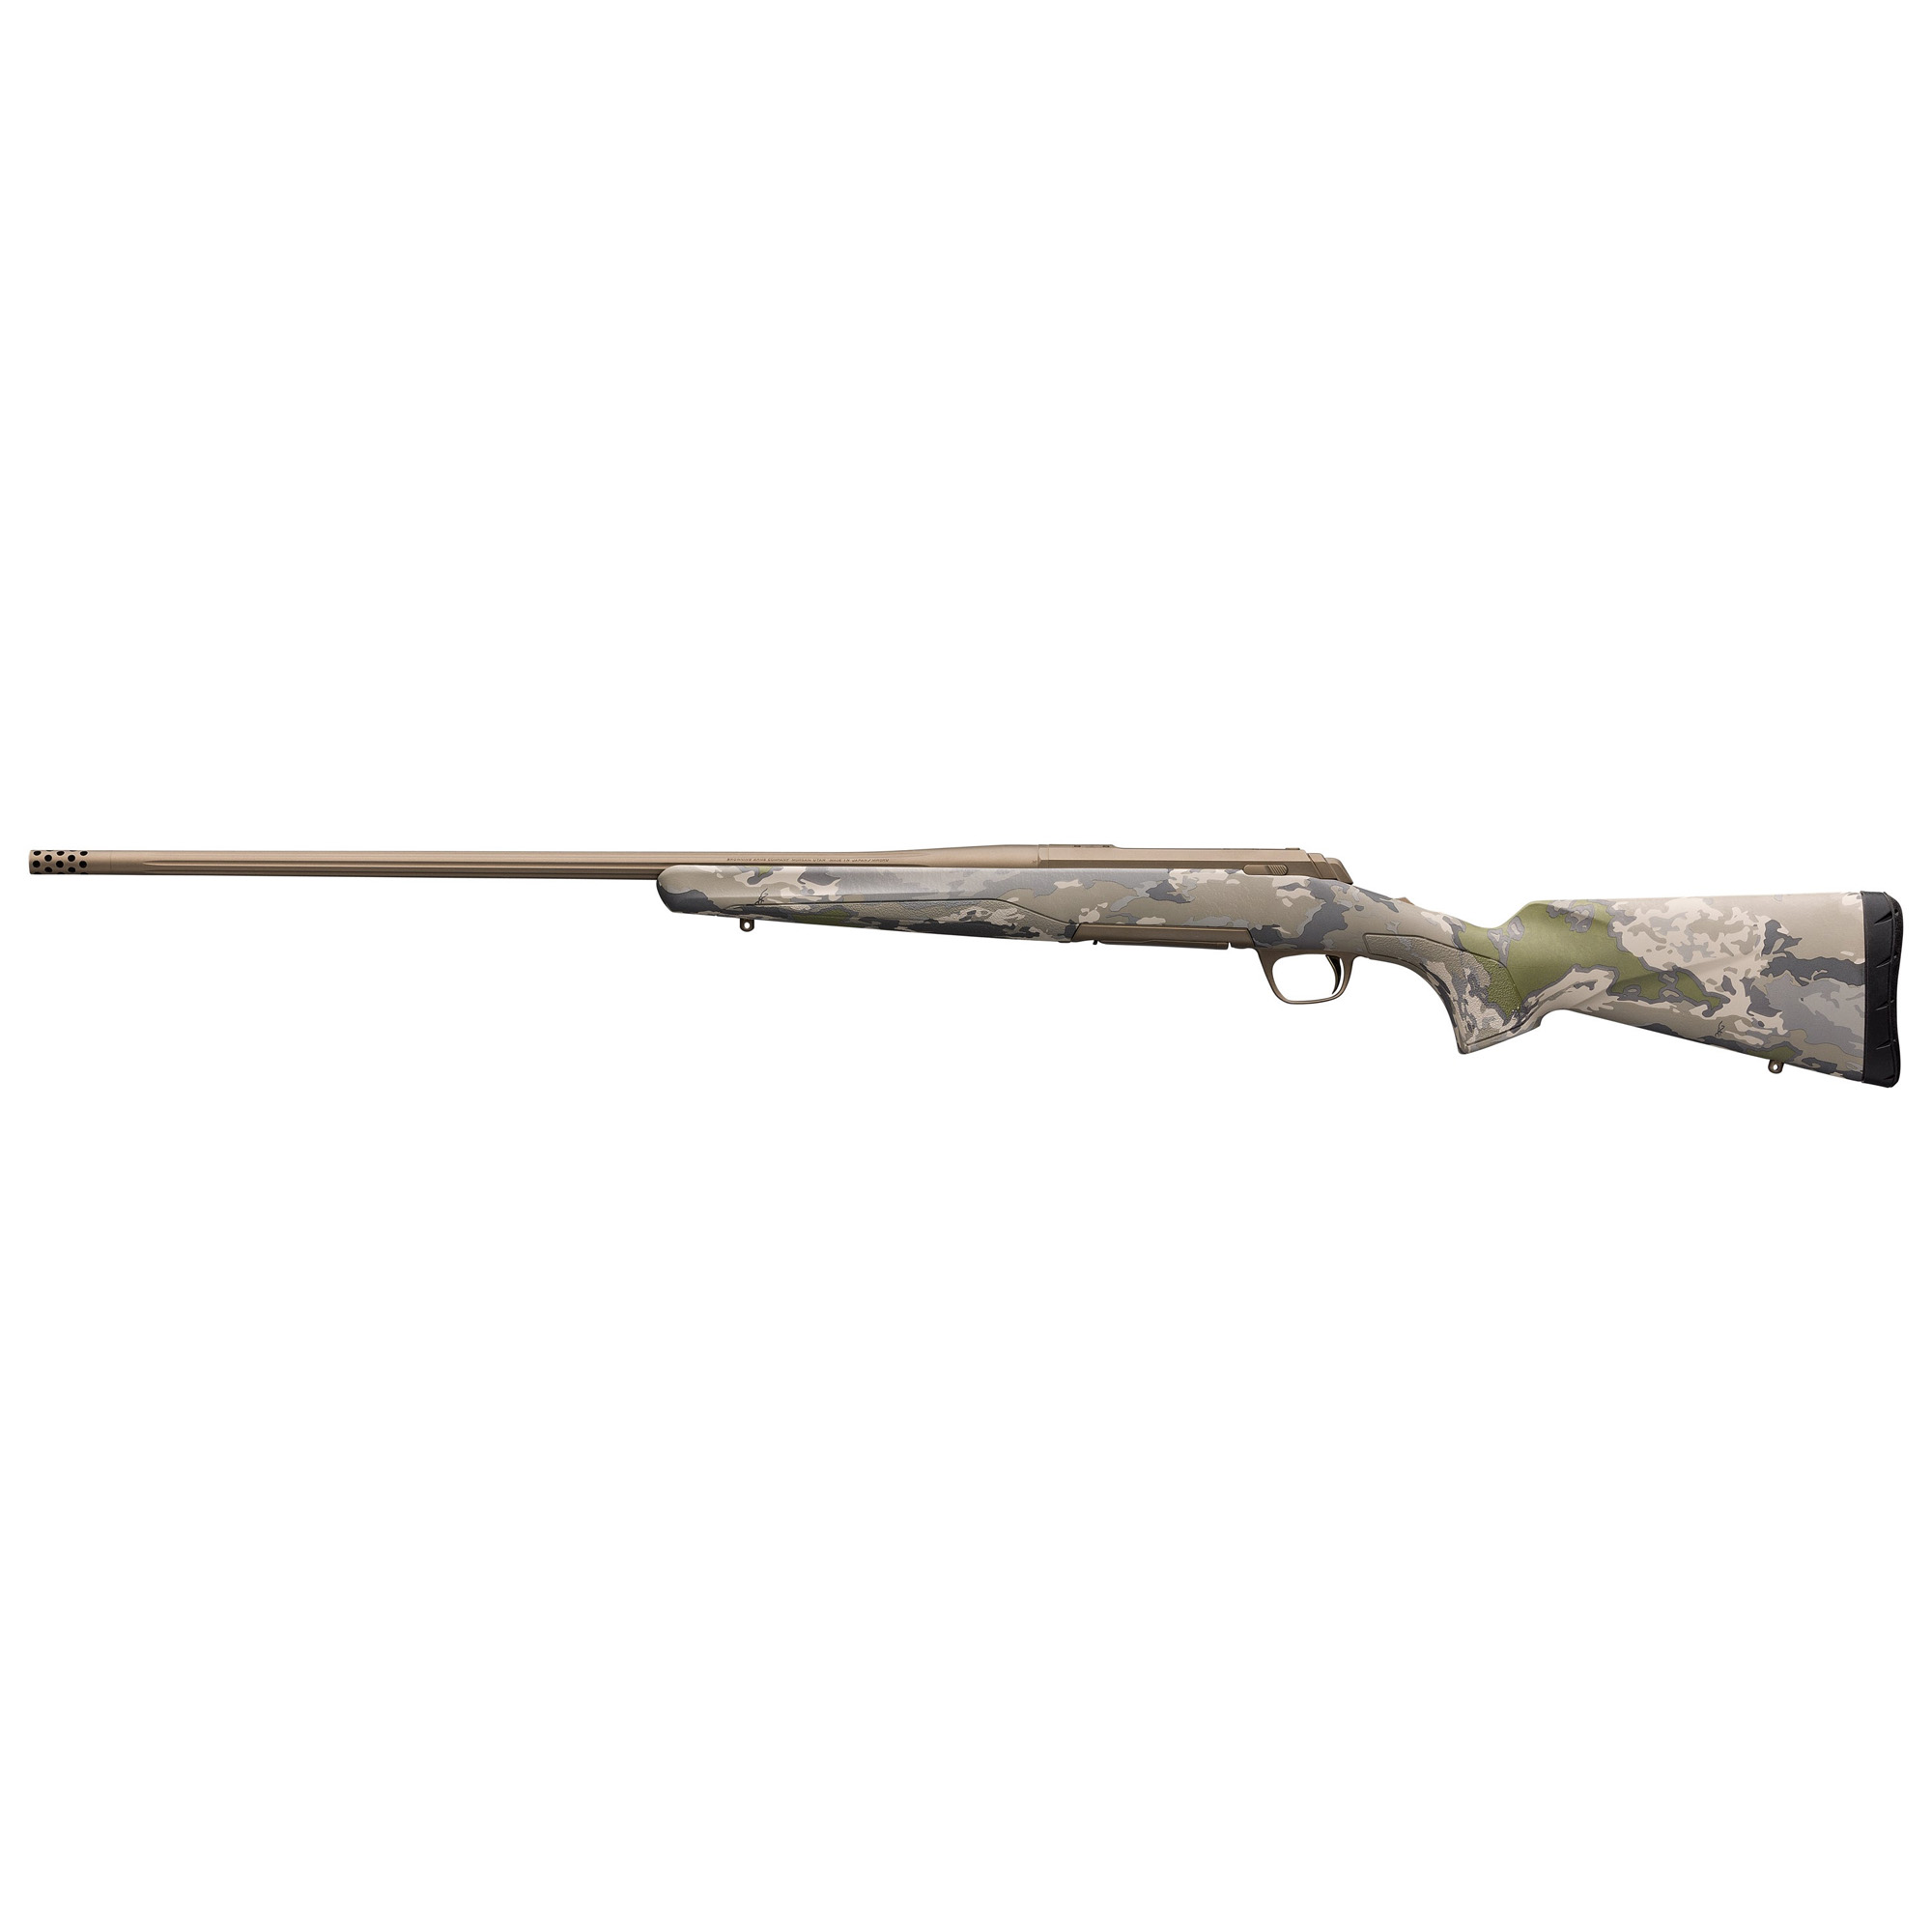 Browning, X-Bolt Speed, Hunting Rifle, Bolt Action, 270 Winchester, 22" Barrel, Fluted Barrel - Threaded M13X.75, Smoked Bronze, OVIX Camo Stock, 4 Rounds, Right Hand